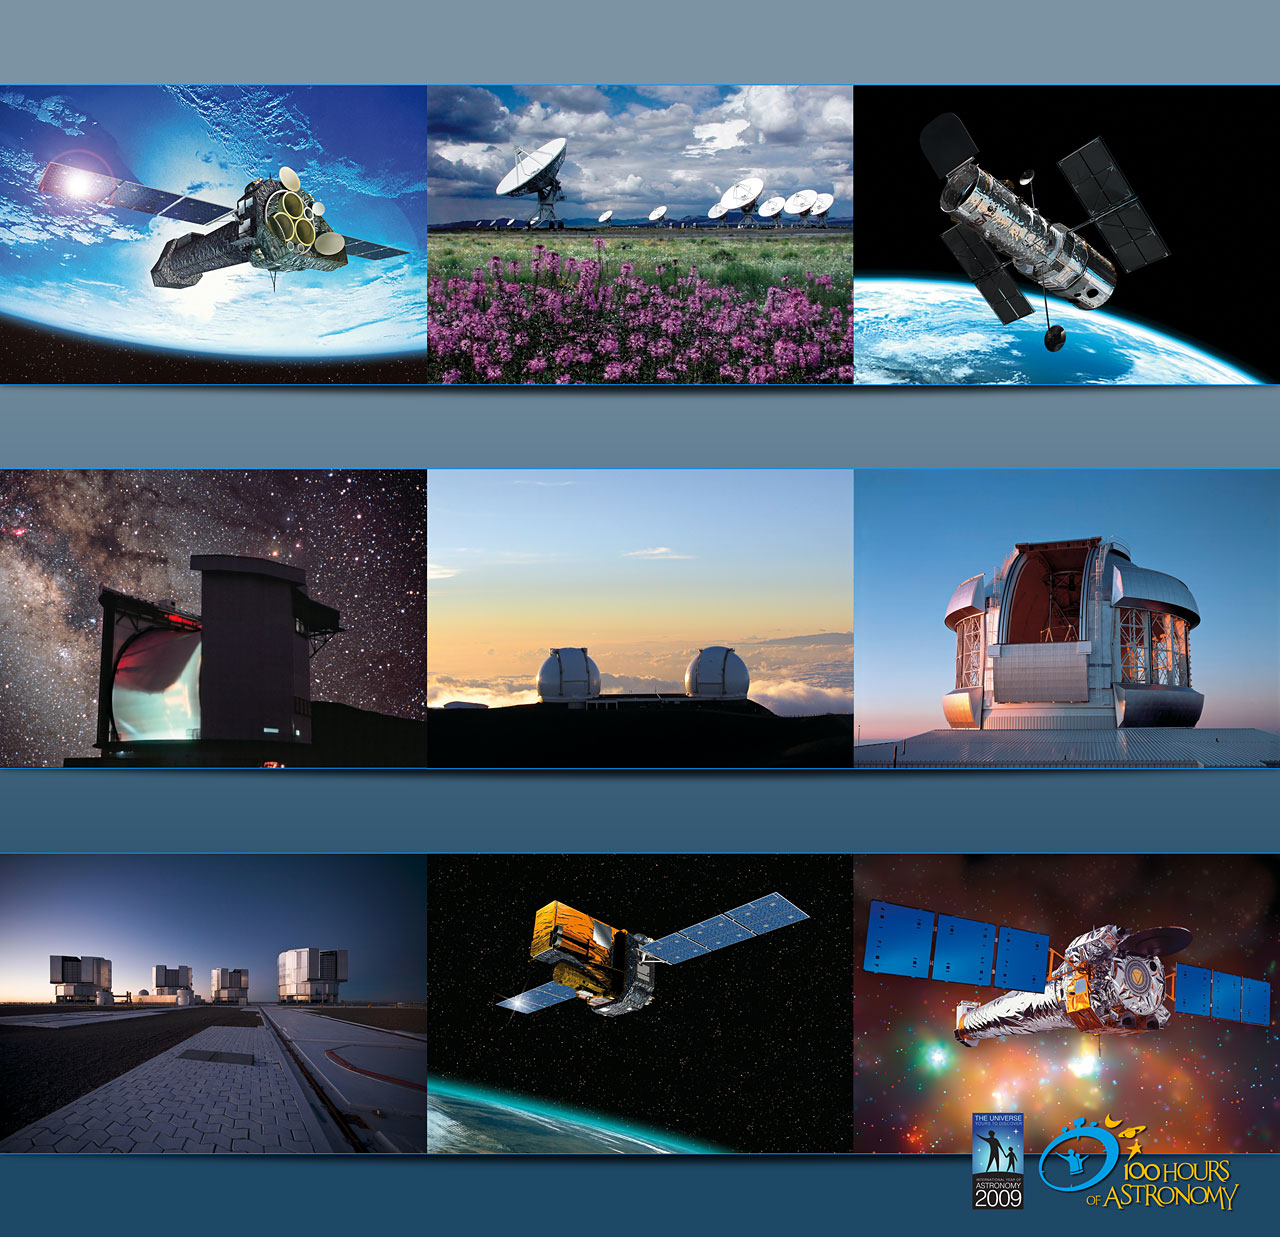 24-hour webcast from the largest telescopes